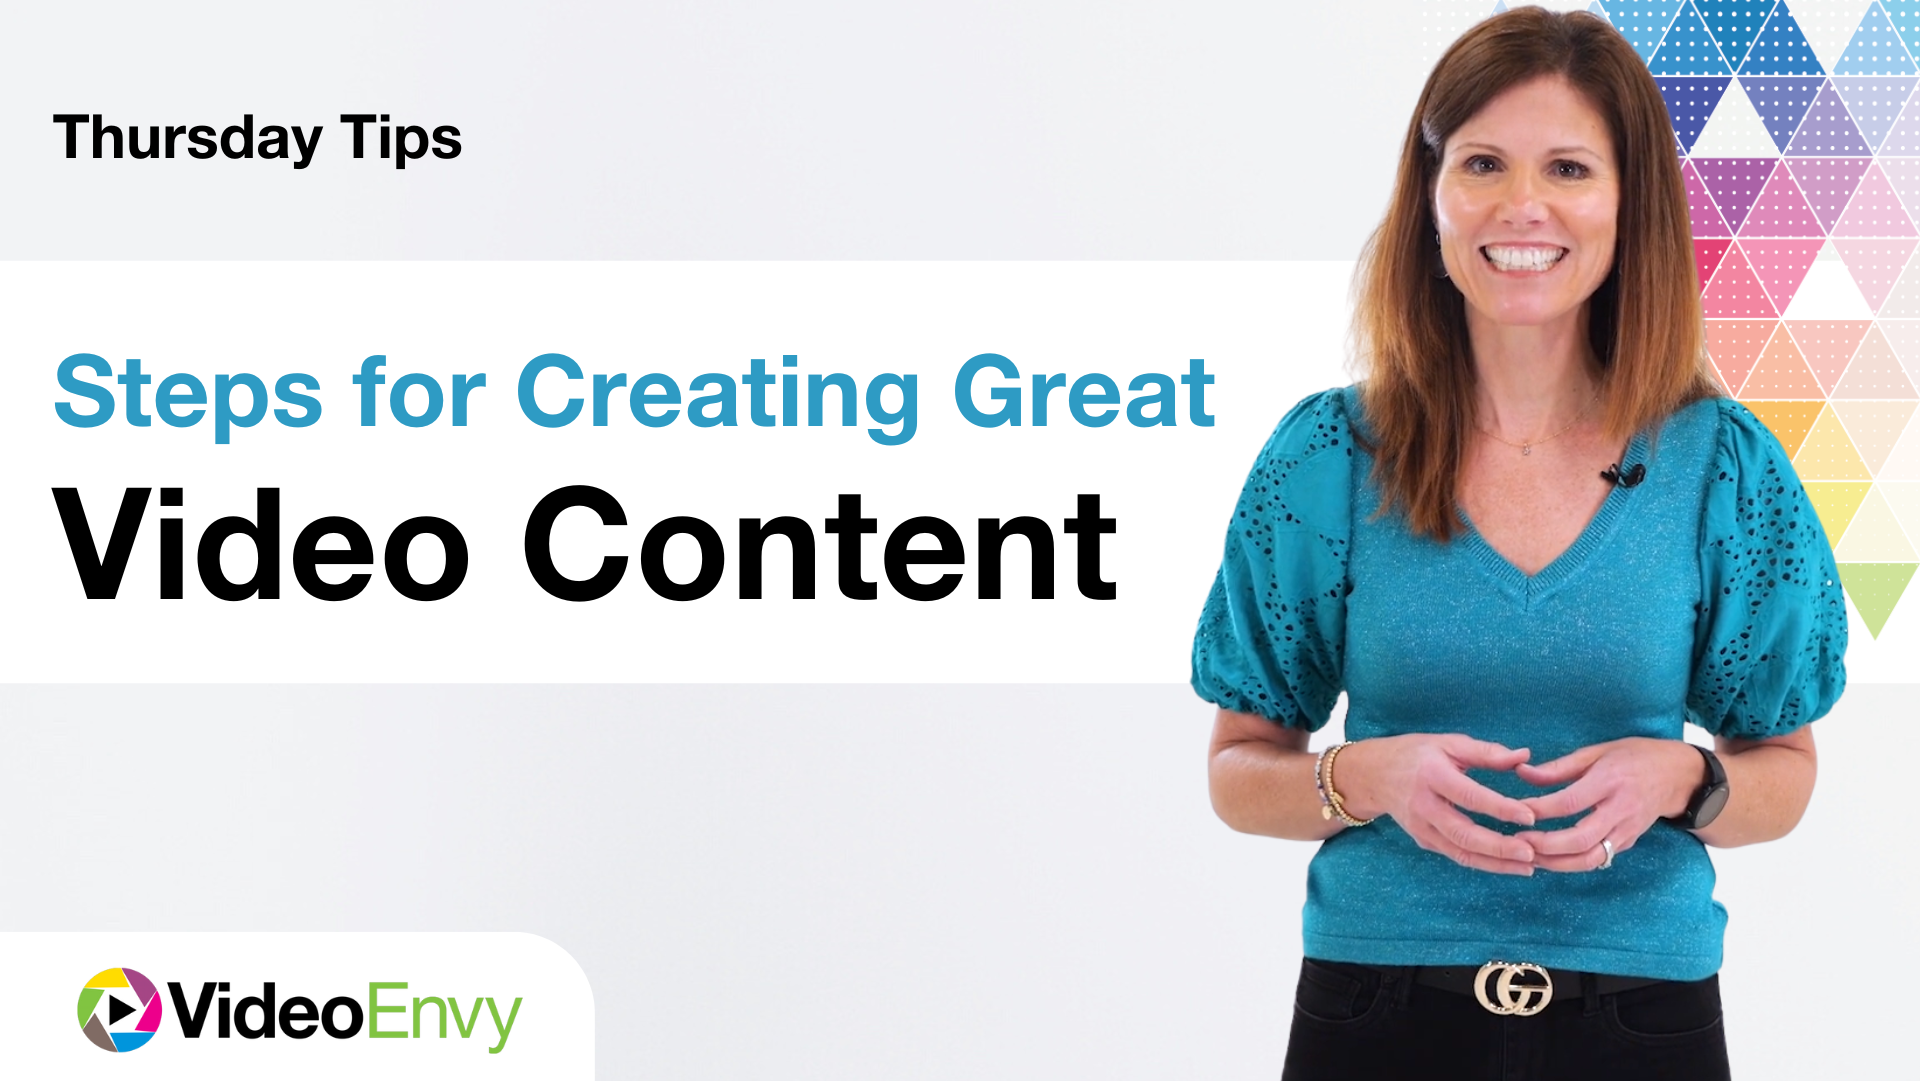 Thursday Tips: Steps for Creating Great Video Content